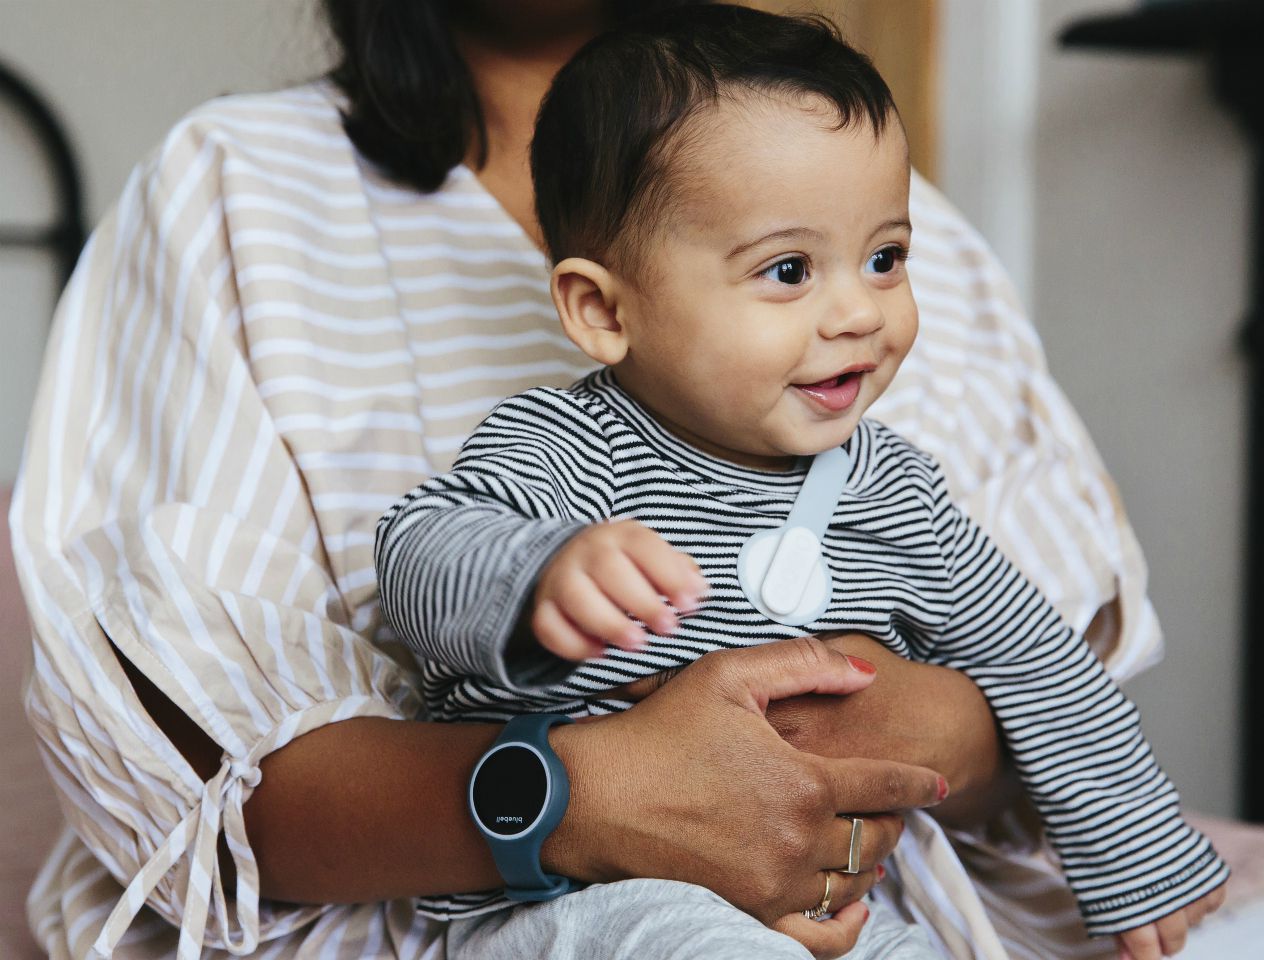 Baby and parent wearing Bluebell smart baby monitor